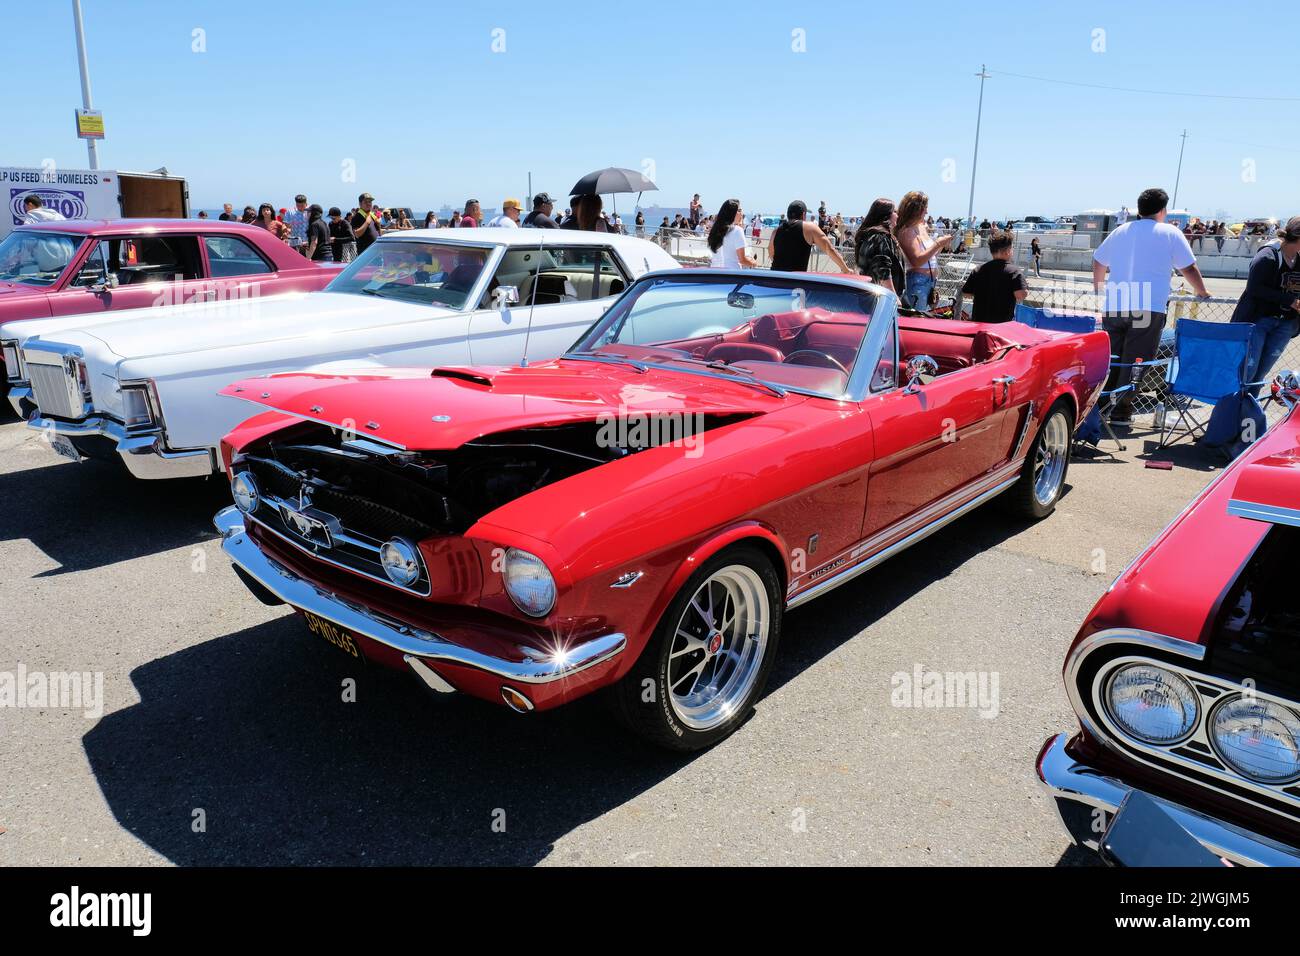 Red convertible 1965 Mustang with a 289 Windsor V8 (4.7 L) engine at a car show in San Francisco, California; classic American car, first generation. Stock Photo